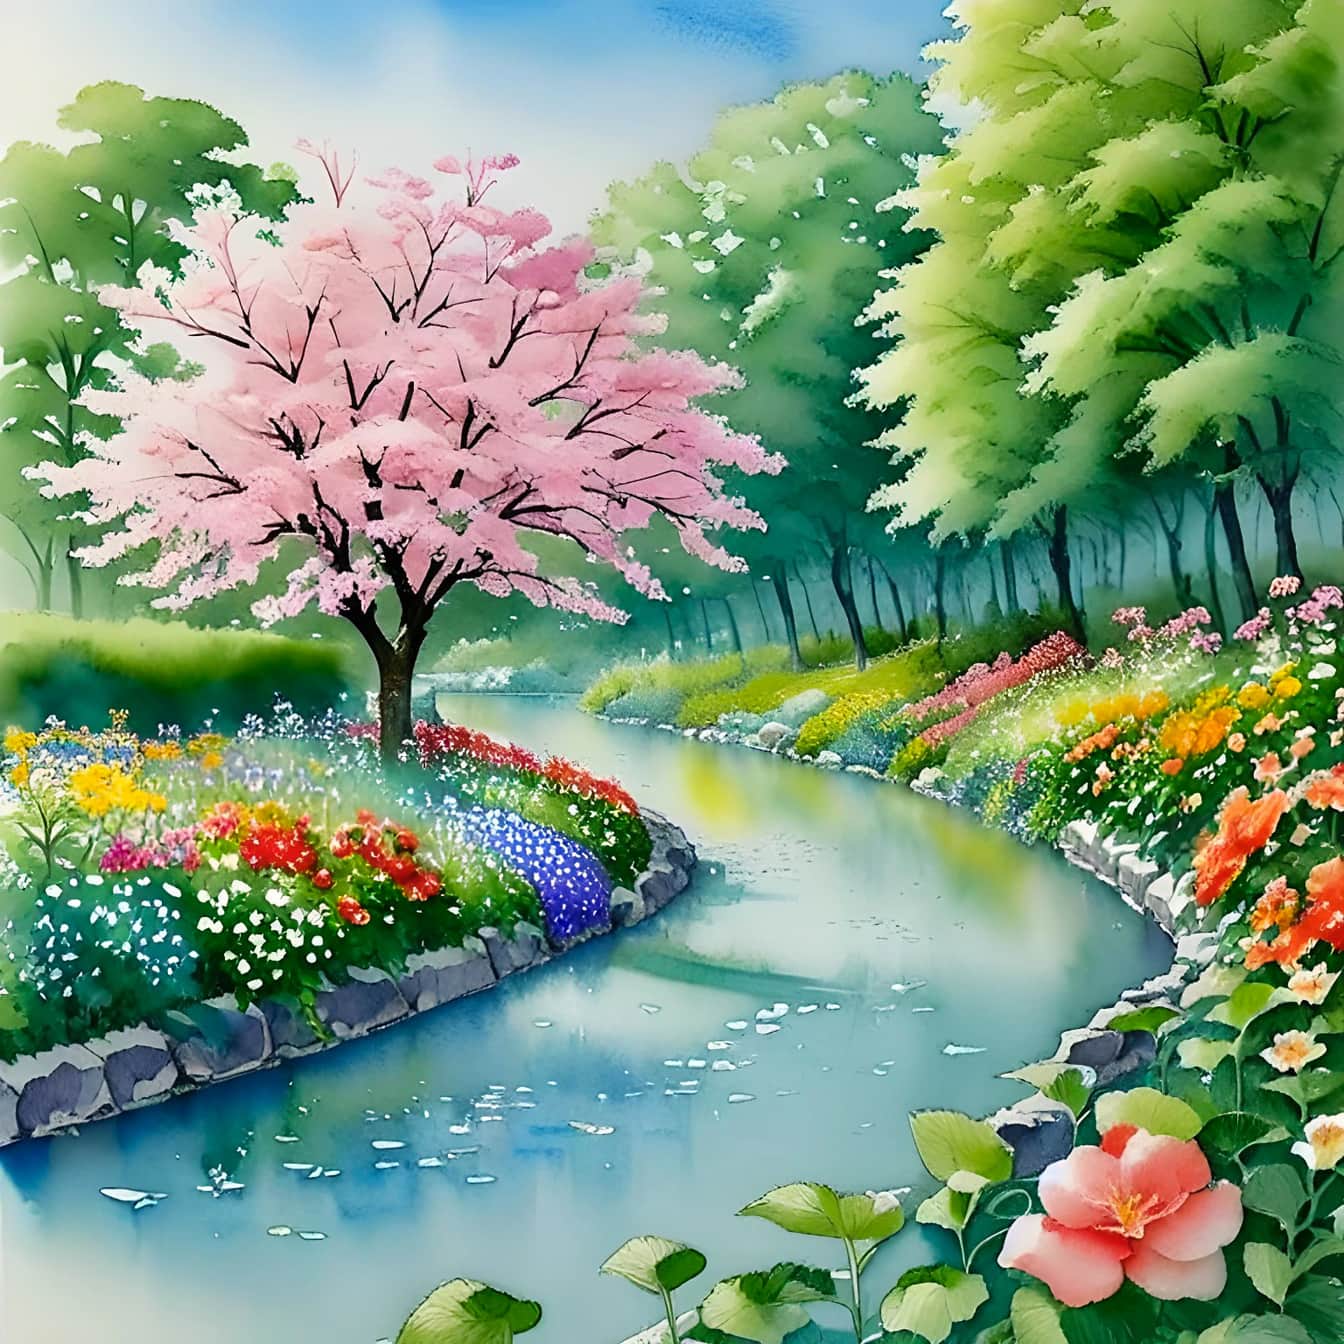 Colorful watercolor landscape of springtime flowers – first day of spring